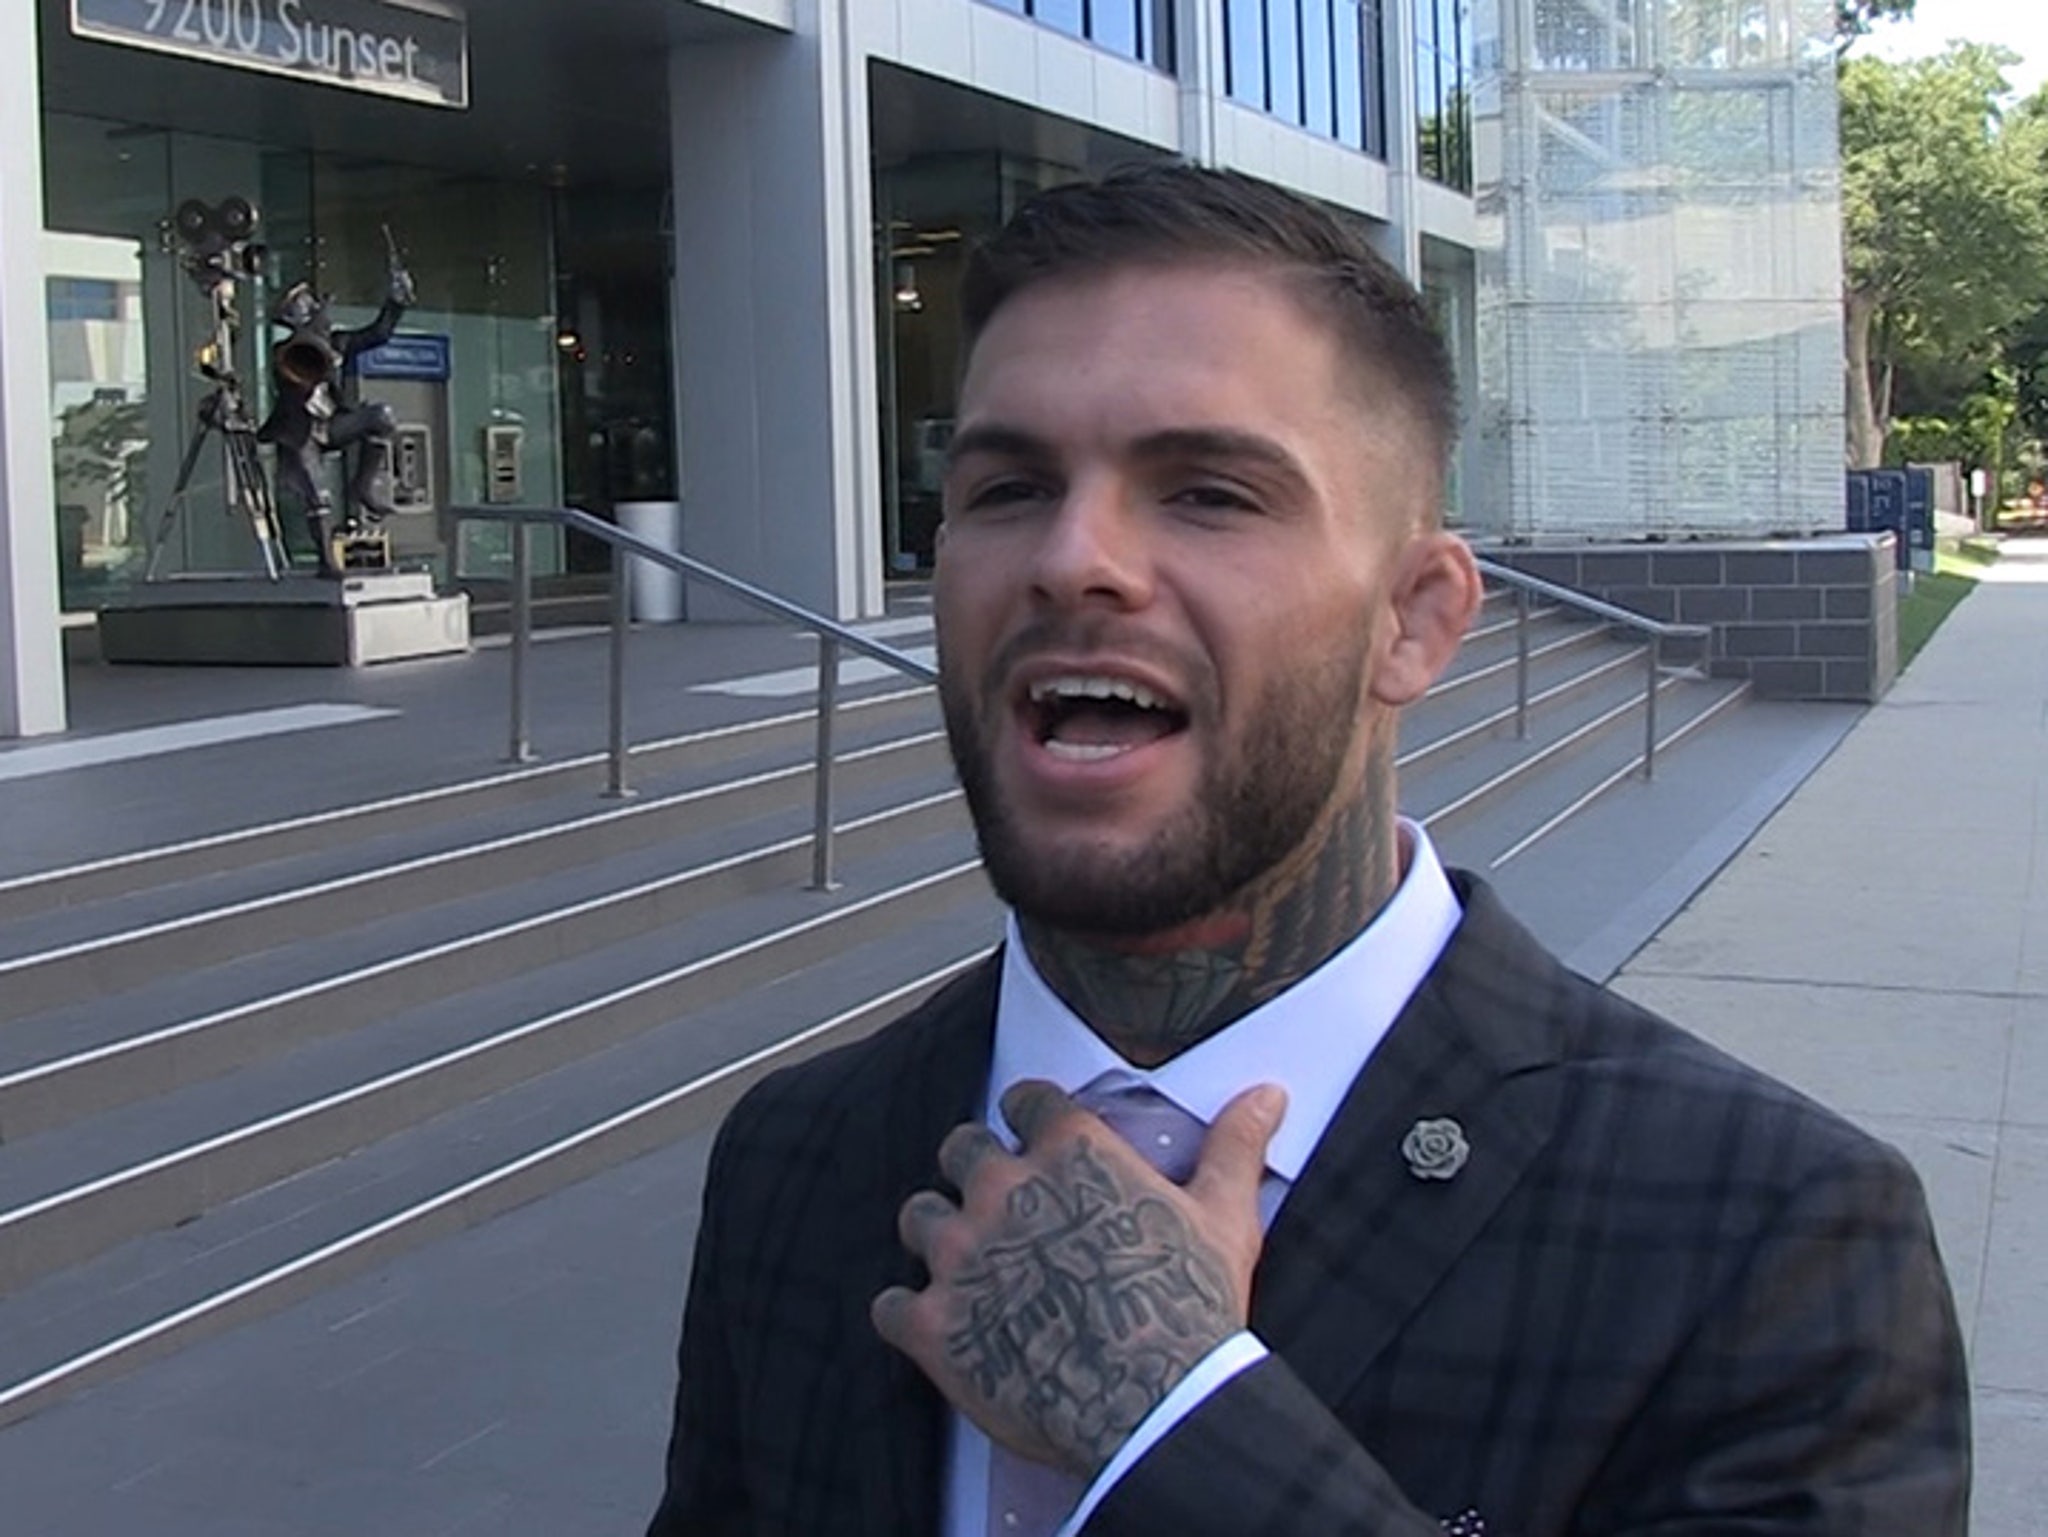 TATTOO FAILS UFC SUPERSTARS WITH HORRIBLE TATTOOS CODY GARBRANDT DARREN  ELKINS AND OTHERS